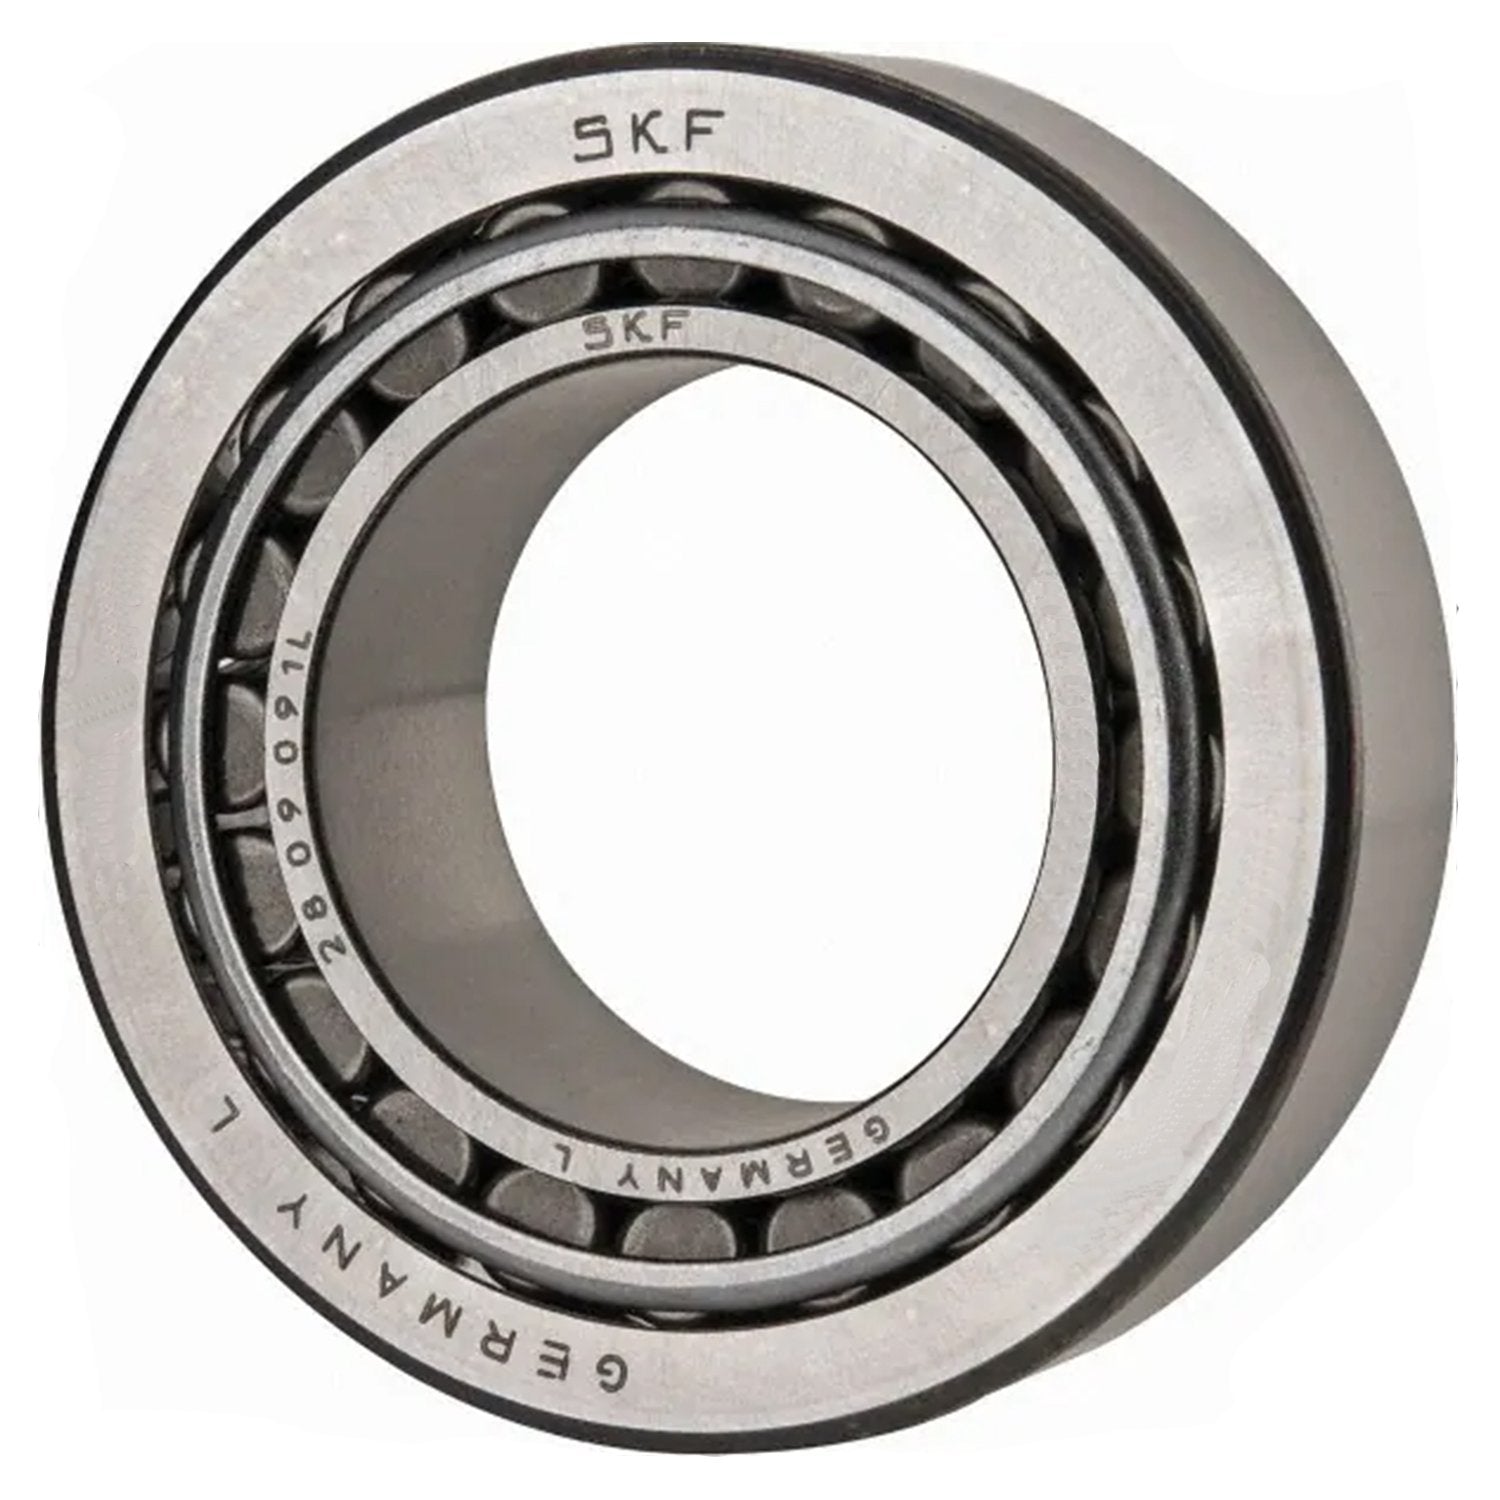 320/28 X SKF Tapered roller bearing 28x52x16